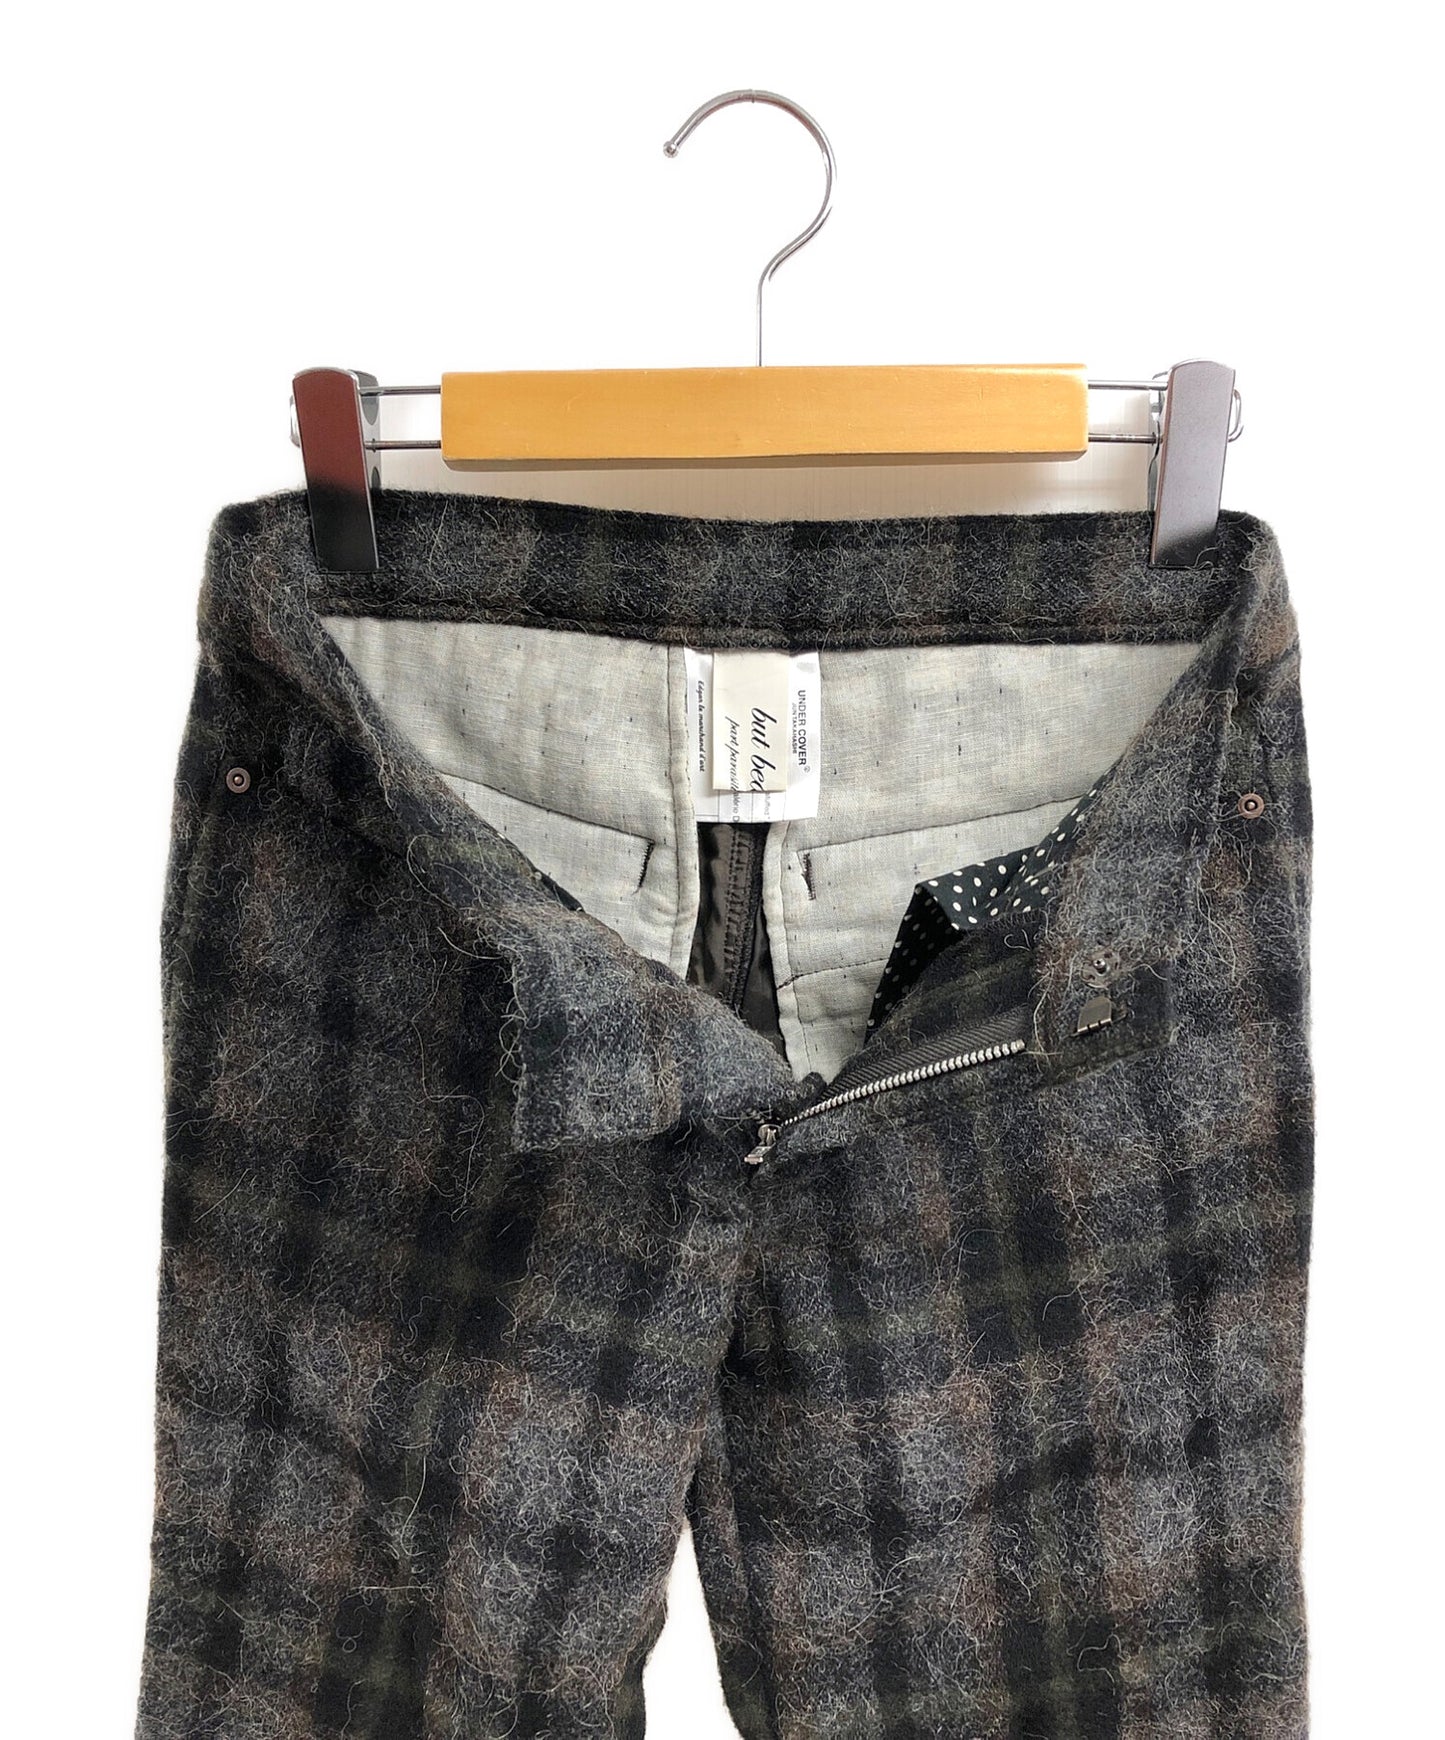 Undercover 05Aw Wool Check Pants